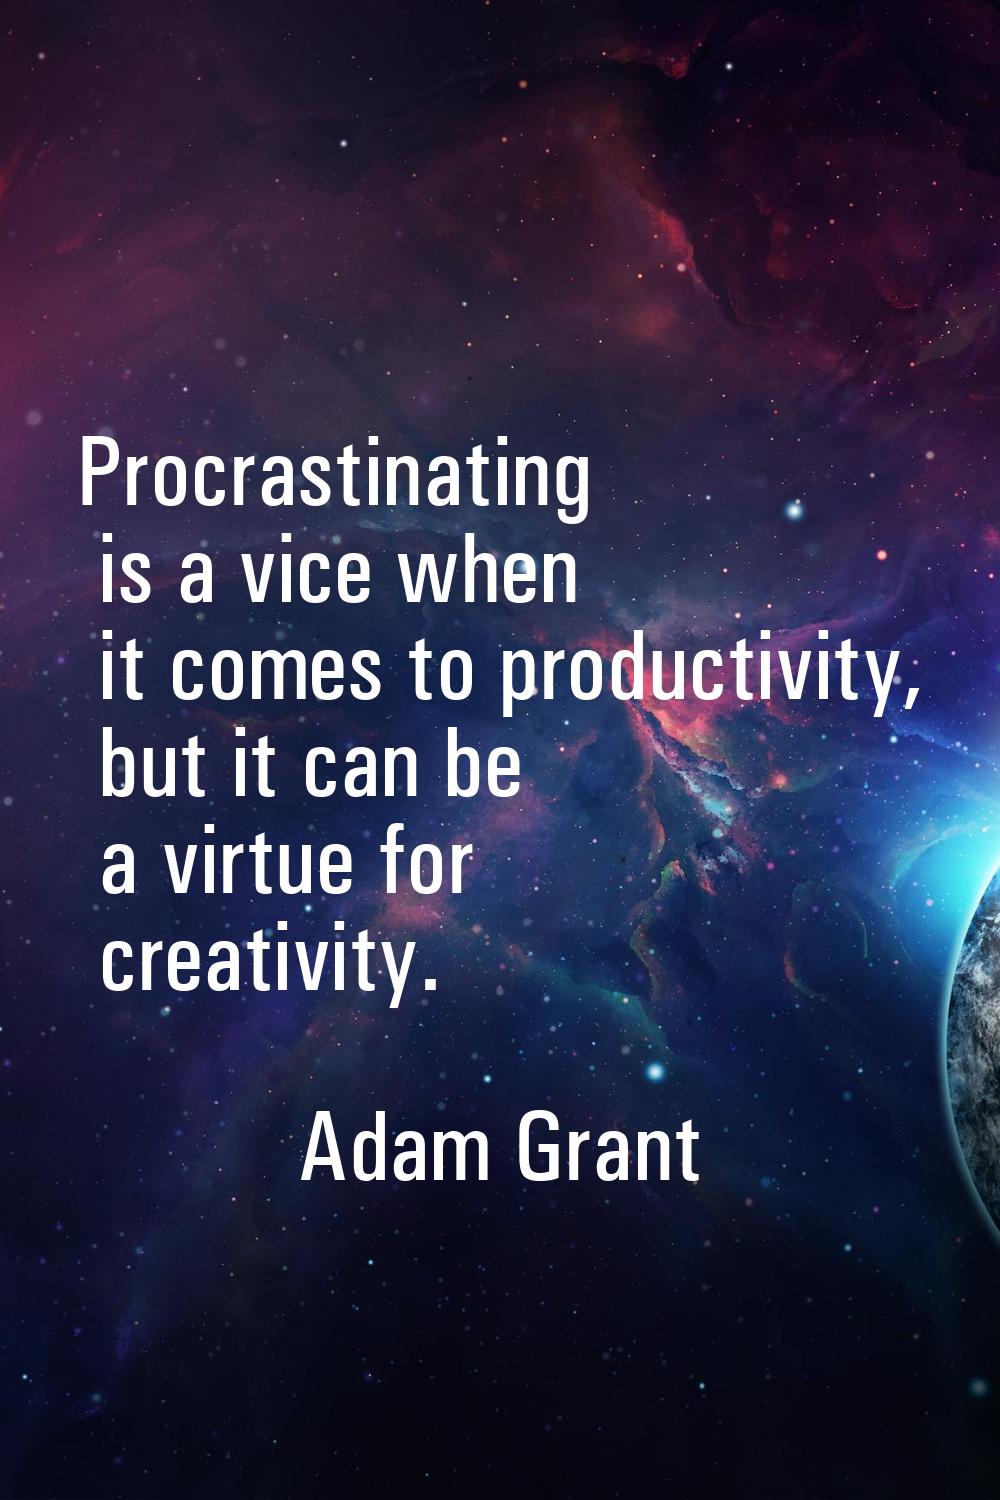 Procrastinating is a vice when it comes to productivity, but it can be a virtue for creativity.